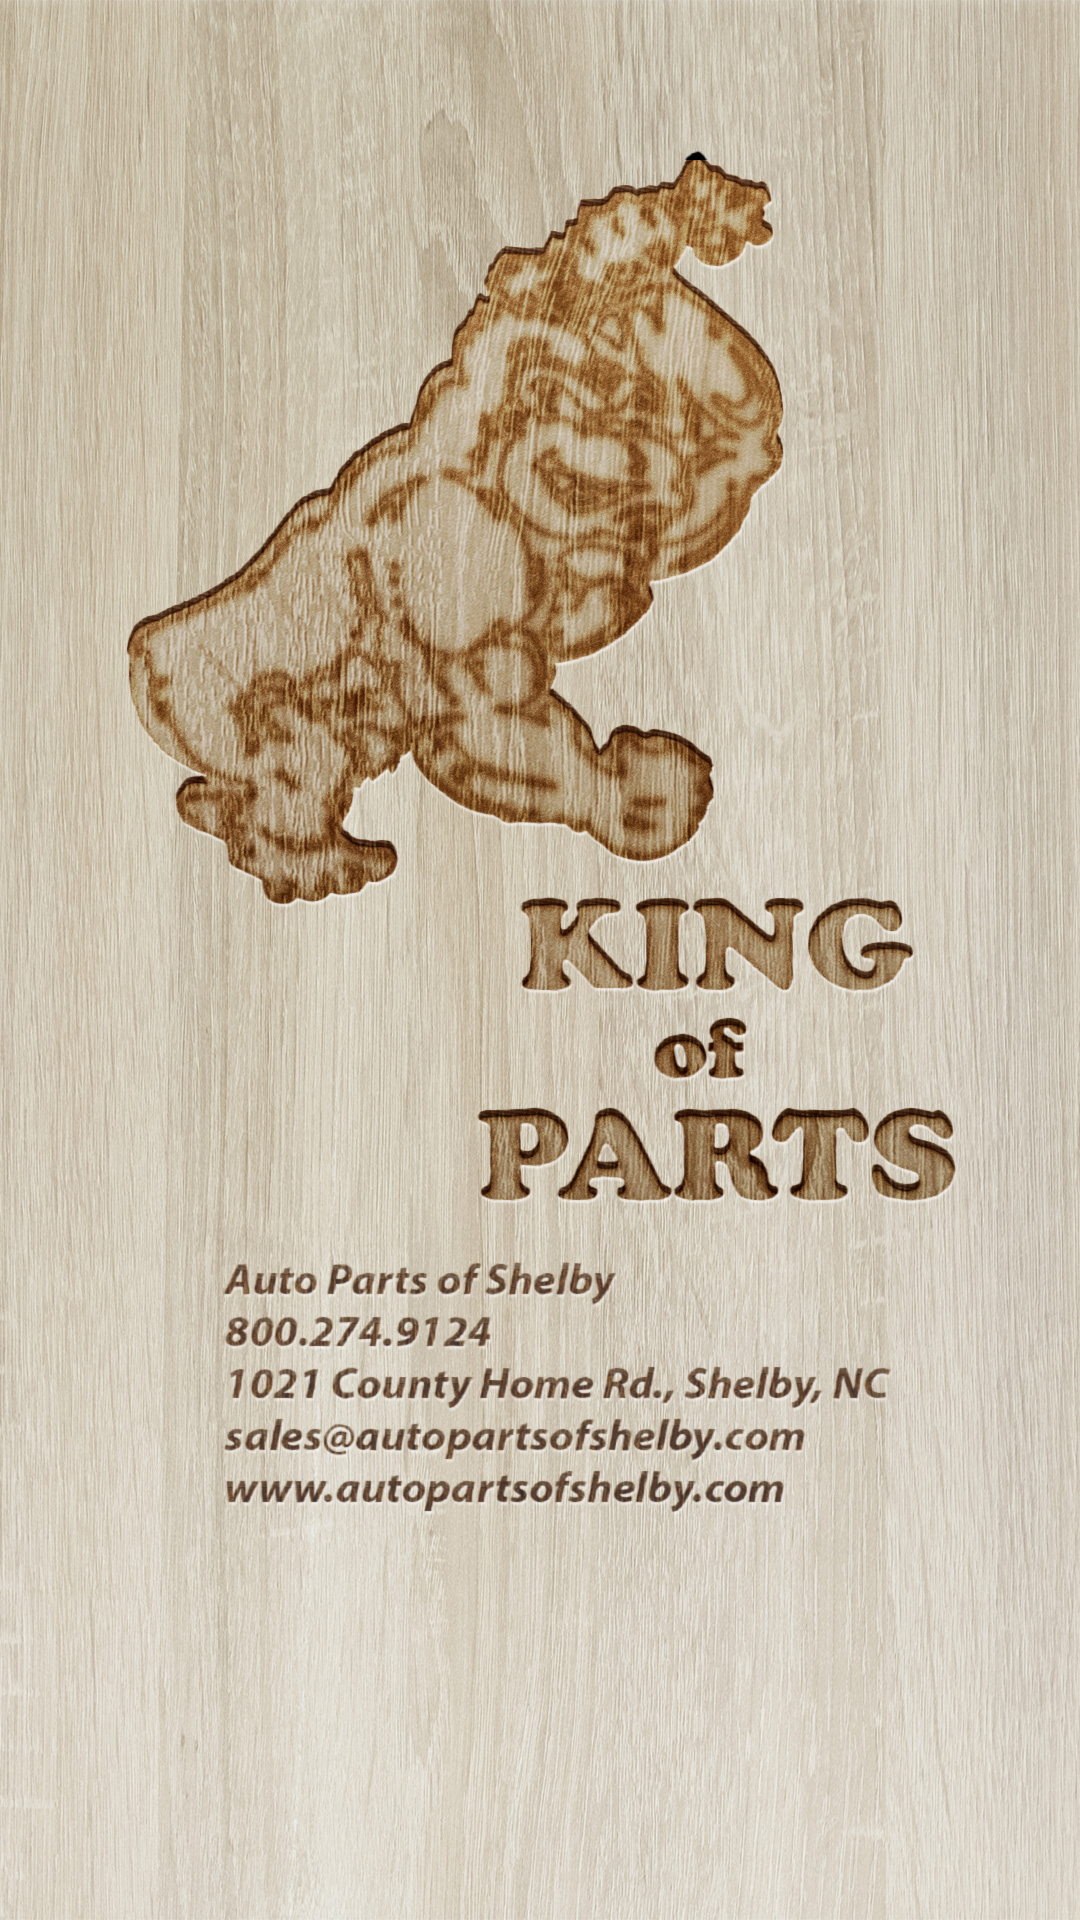 Auto Parts of Shelby engraved wood smartphone wallpaper 1080 x 1920